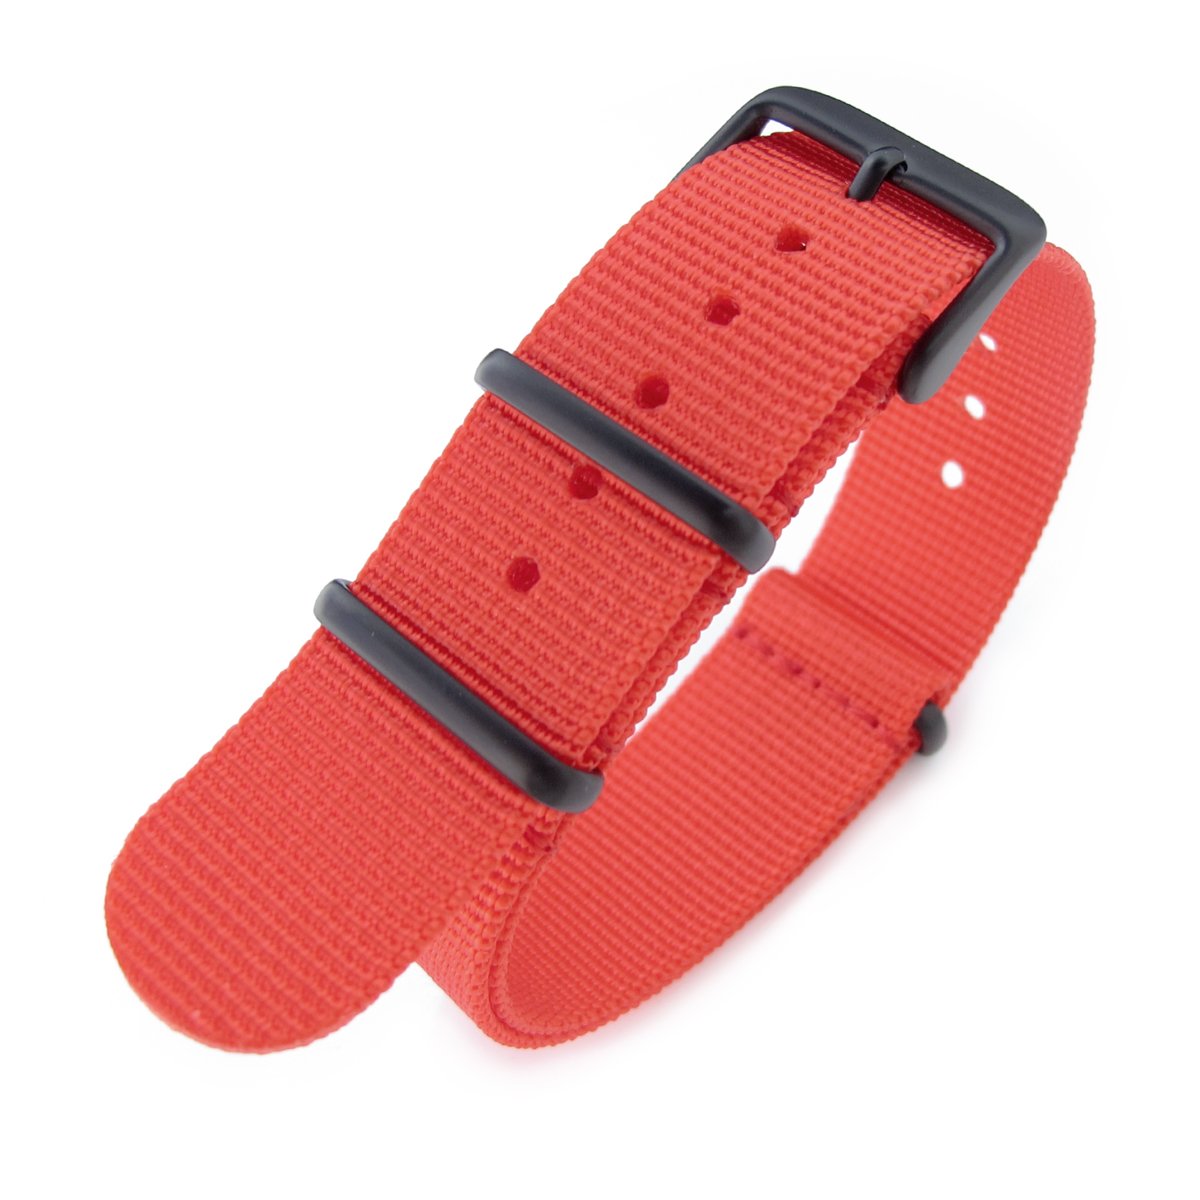 NATO 20mm G10 Military Watch Band Nylon Strap Red PVD Black 260mm Strapcode Watch Bands